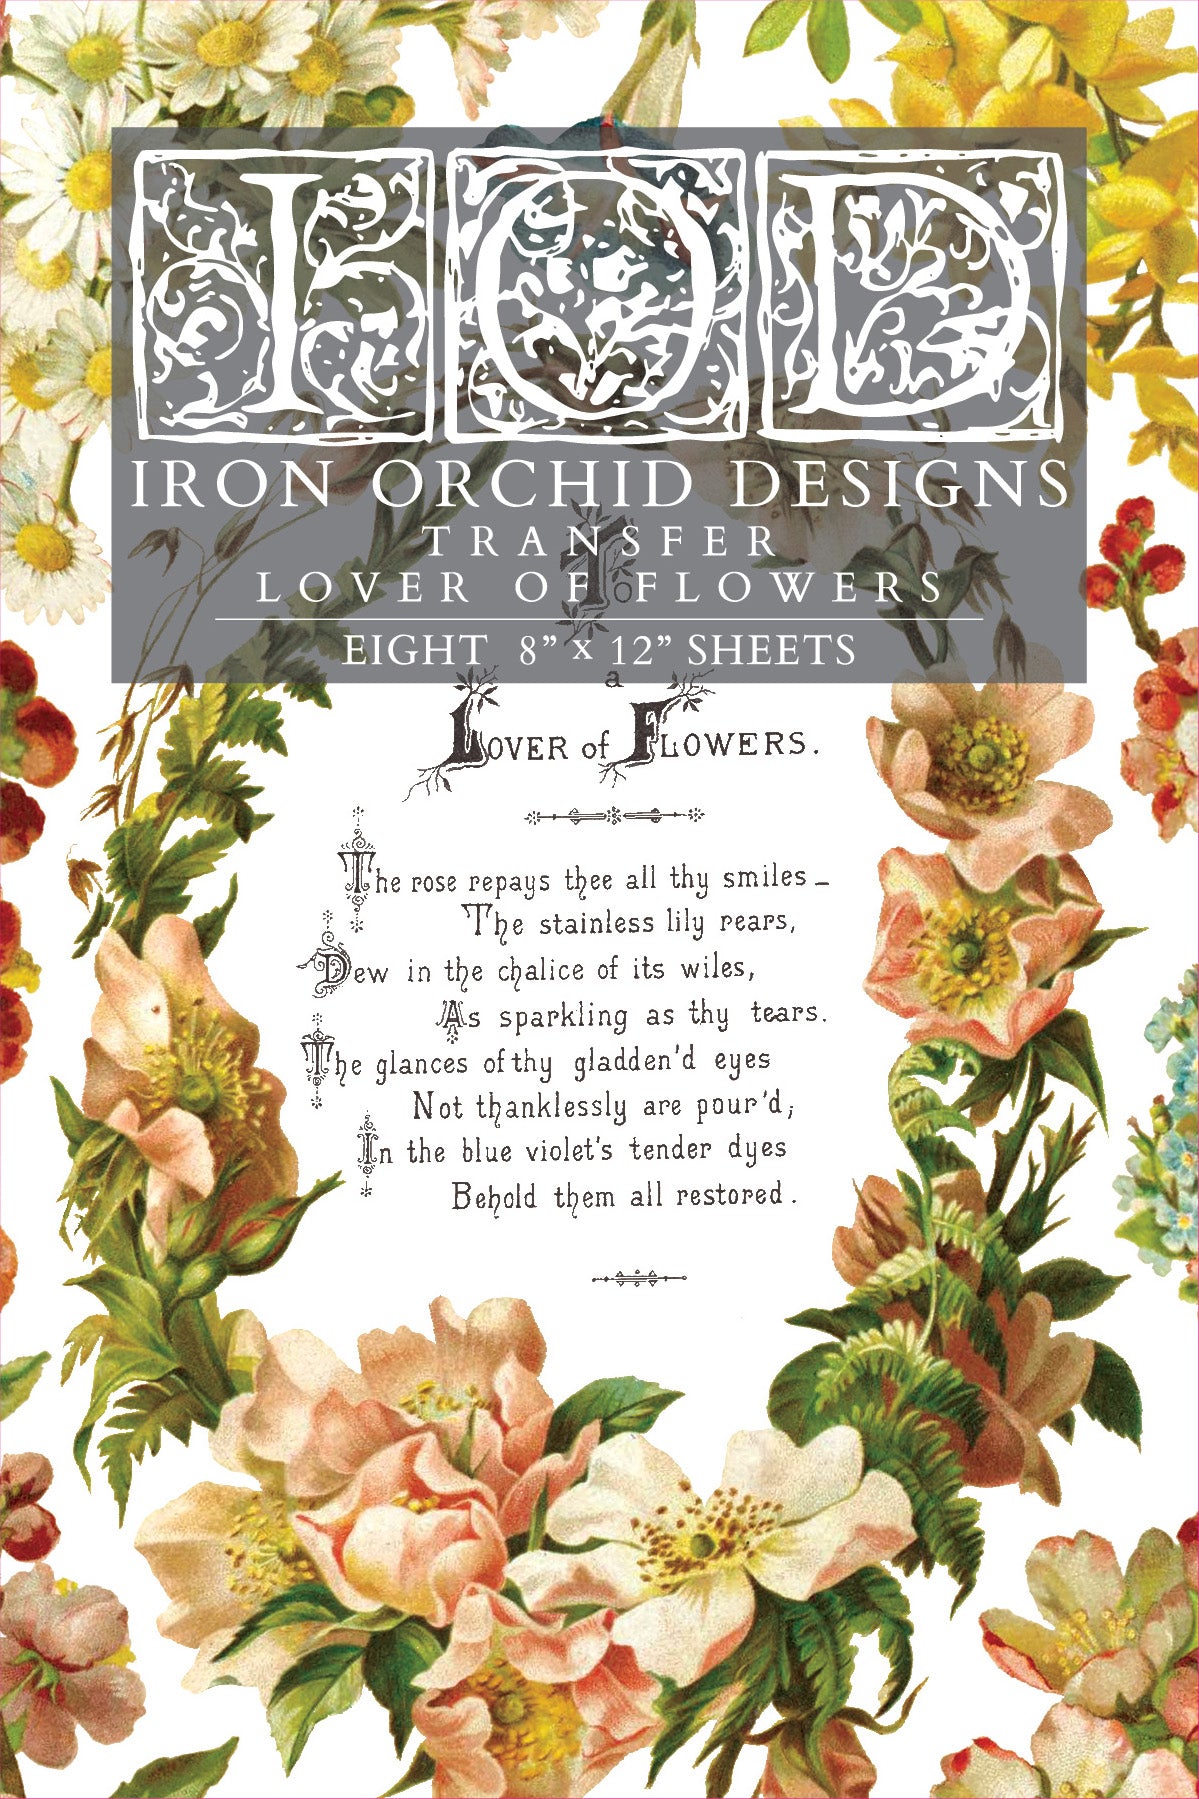 Lover of Flowers IOD Transfer 8x12 Pad Iron Orchid Designs, LLC.